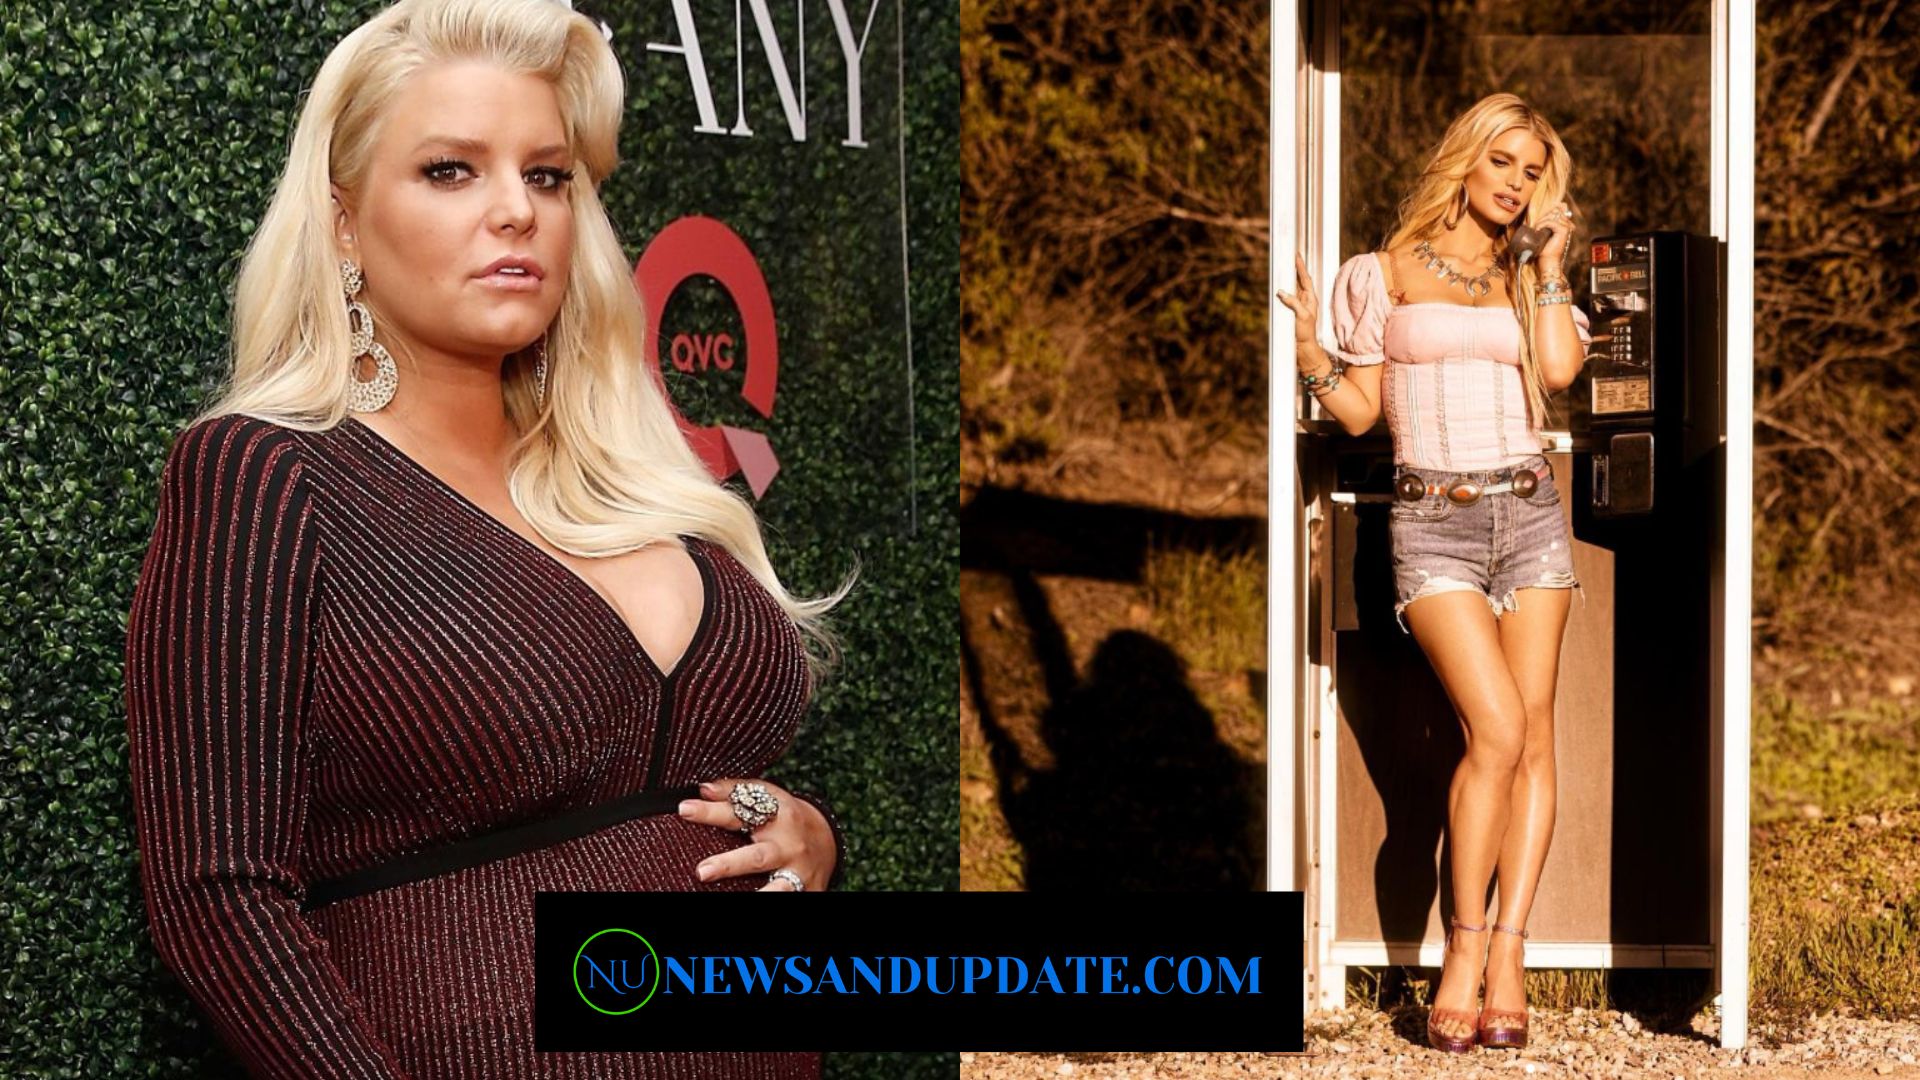 All You Need To Know About Jessica Simpson's Weight Loss And Personal Life